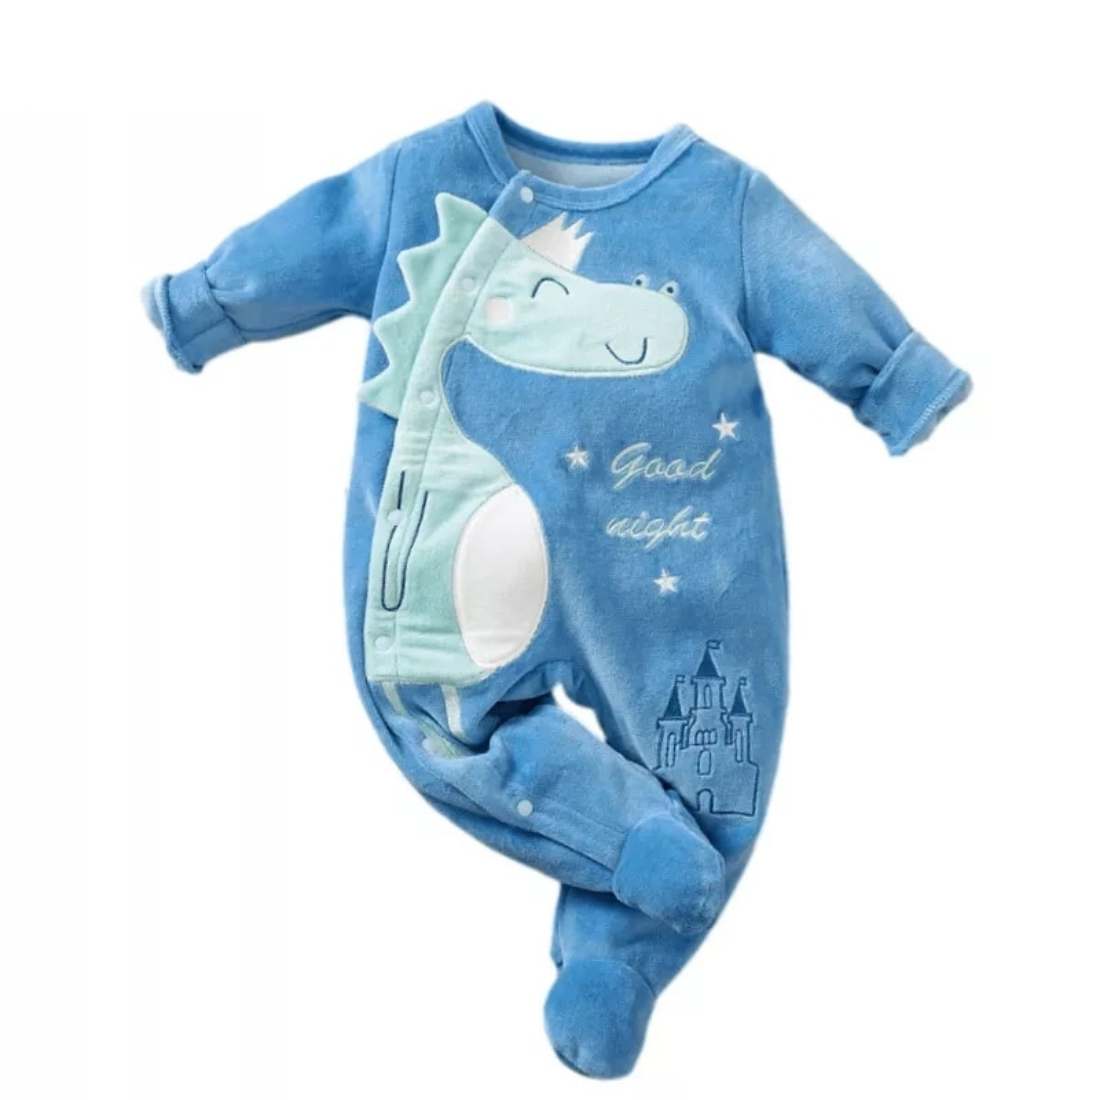 Baby Romper Suit Snow Suit Costume Style Sleep Suit One Piece at Rs 450/ piece, Infant Rompers in Ludhiana